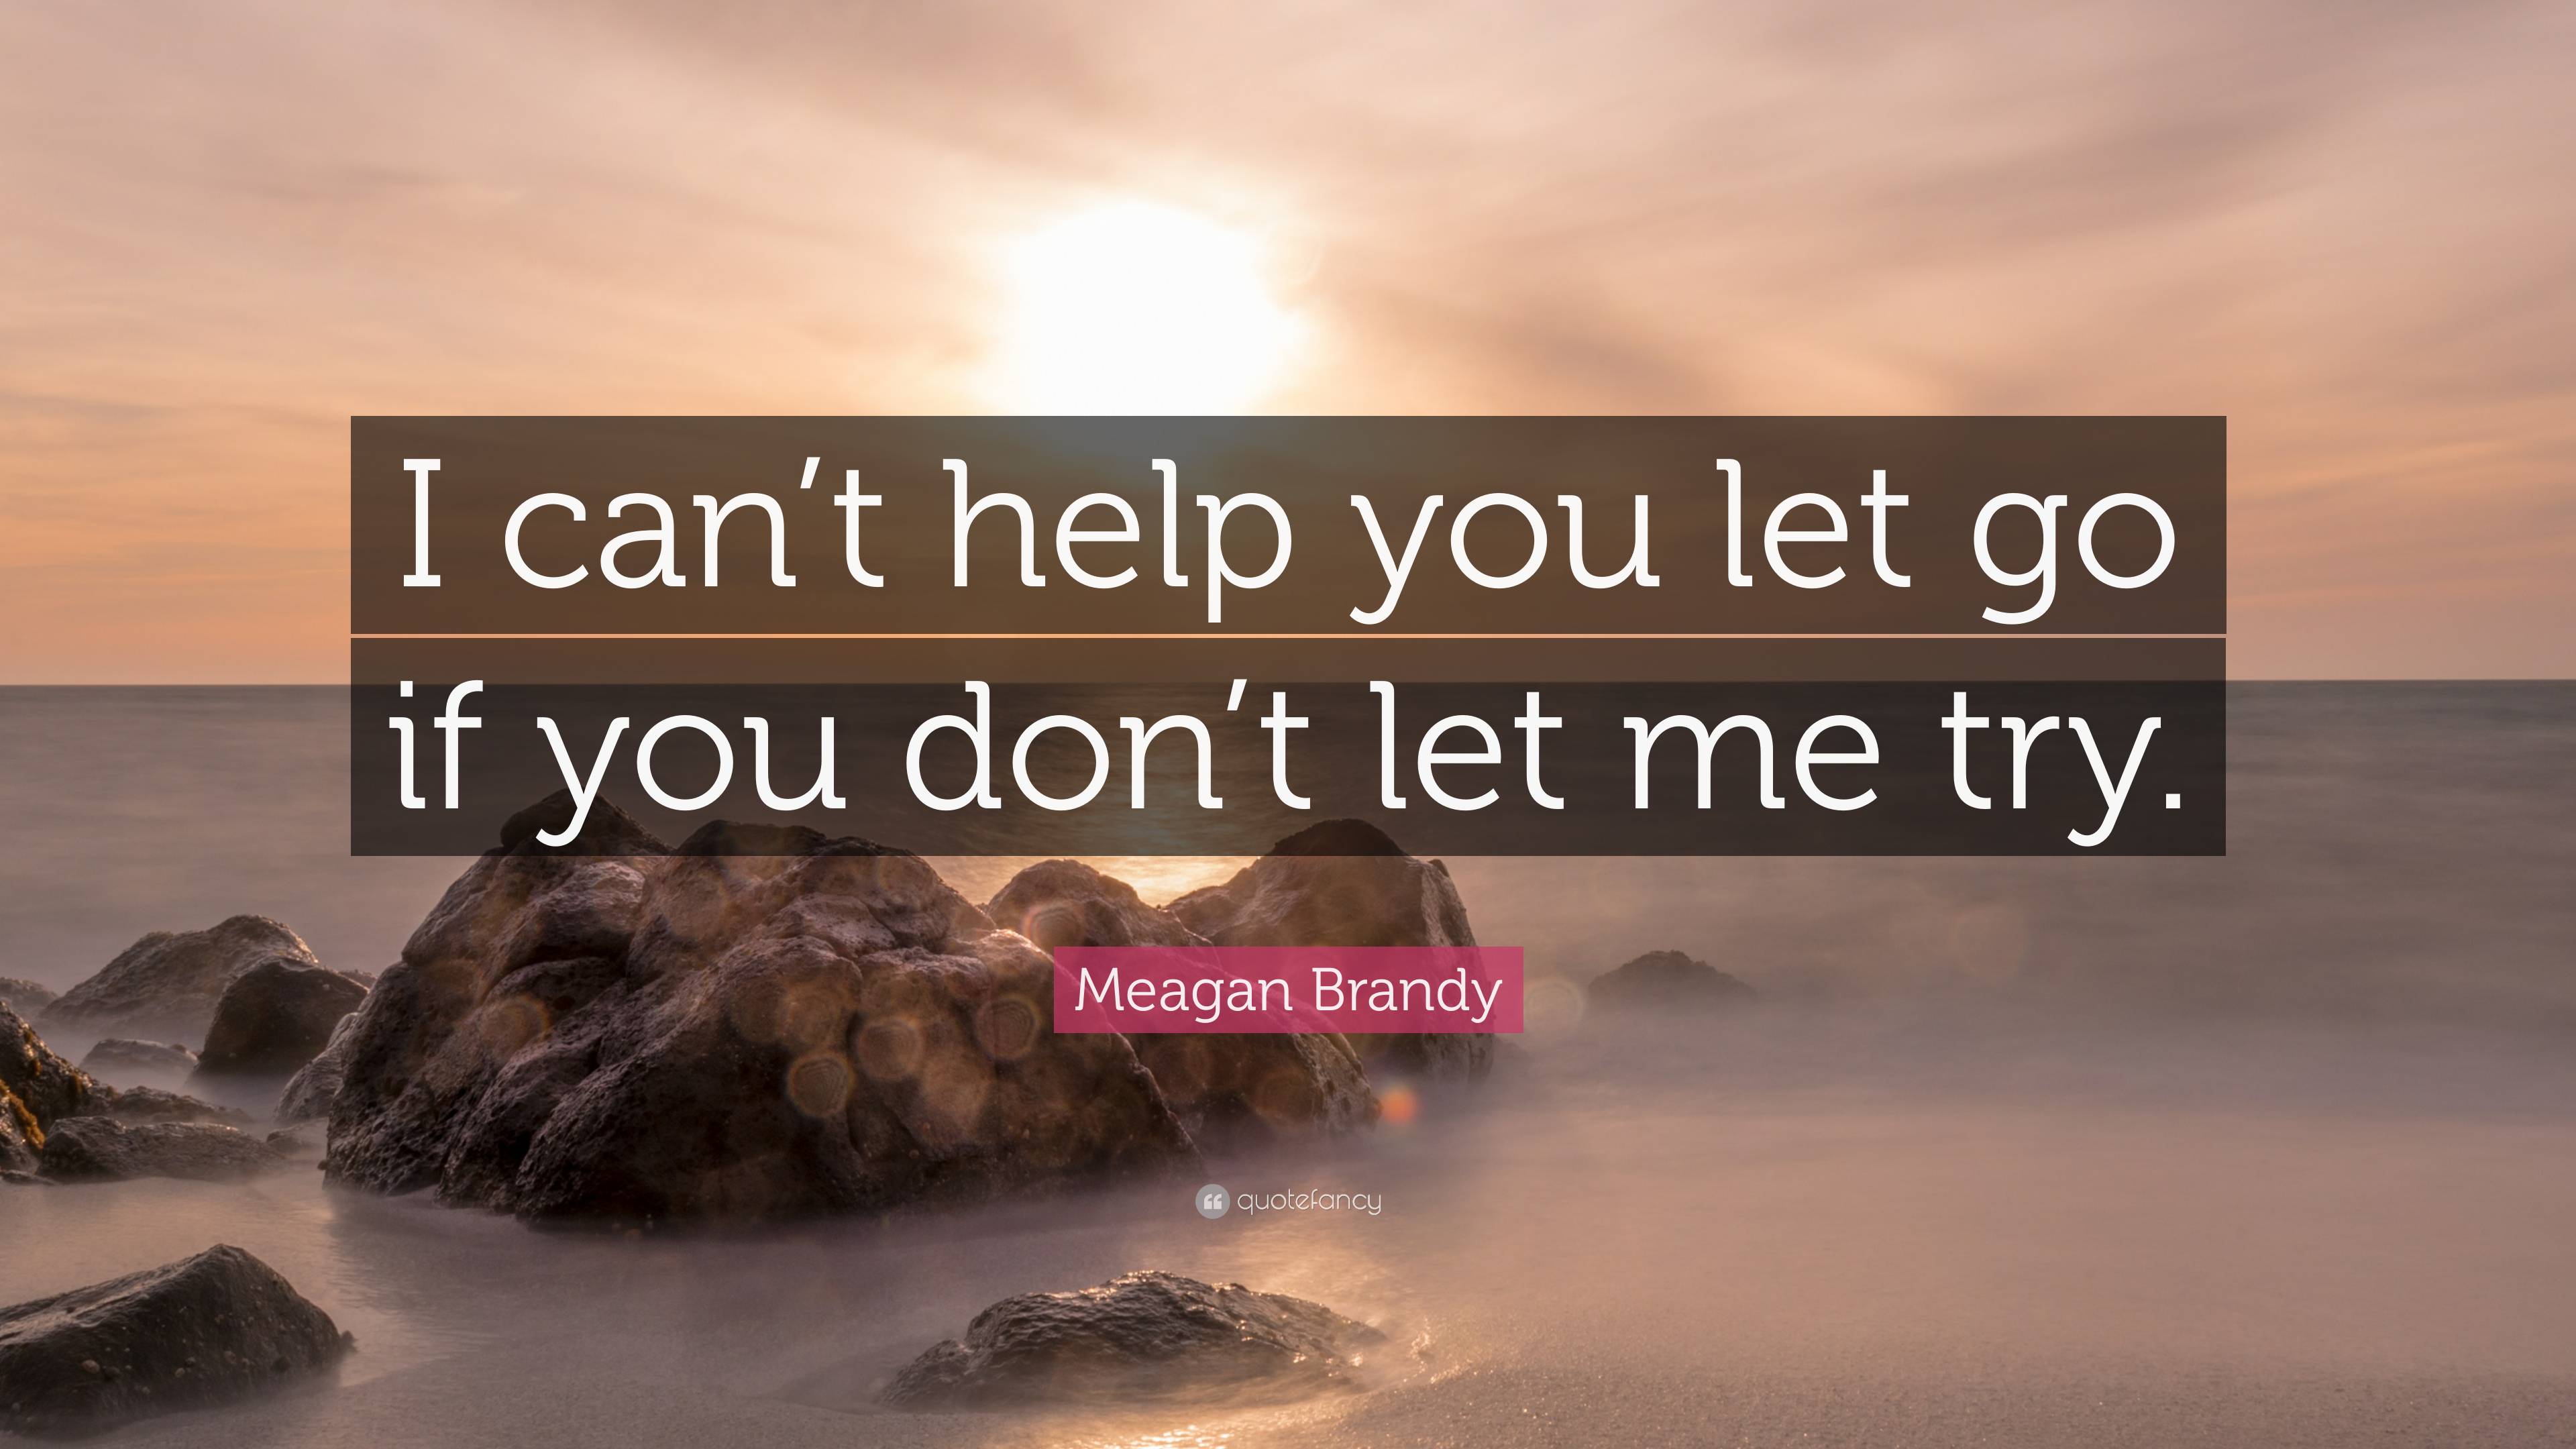 Meagan Brandy Quote: “I can’t help you let go if you don’t let me try.”